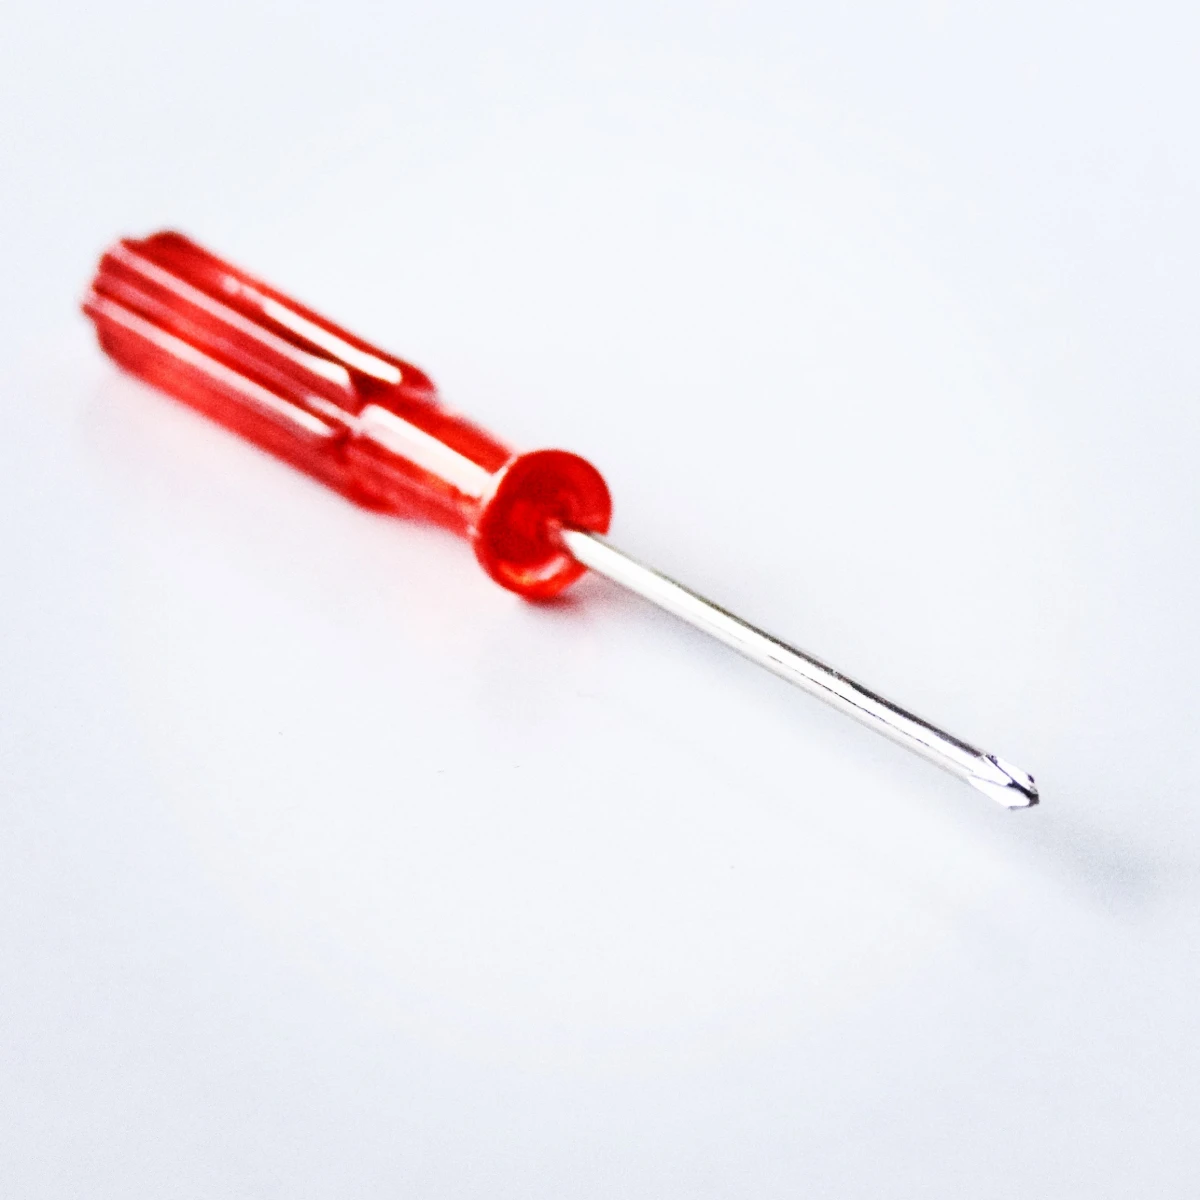 red screwdriver on a white background